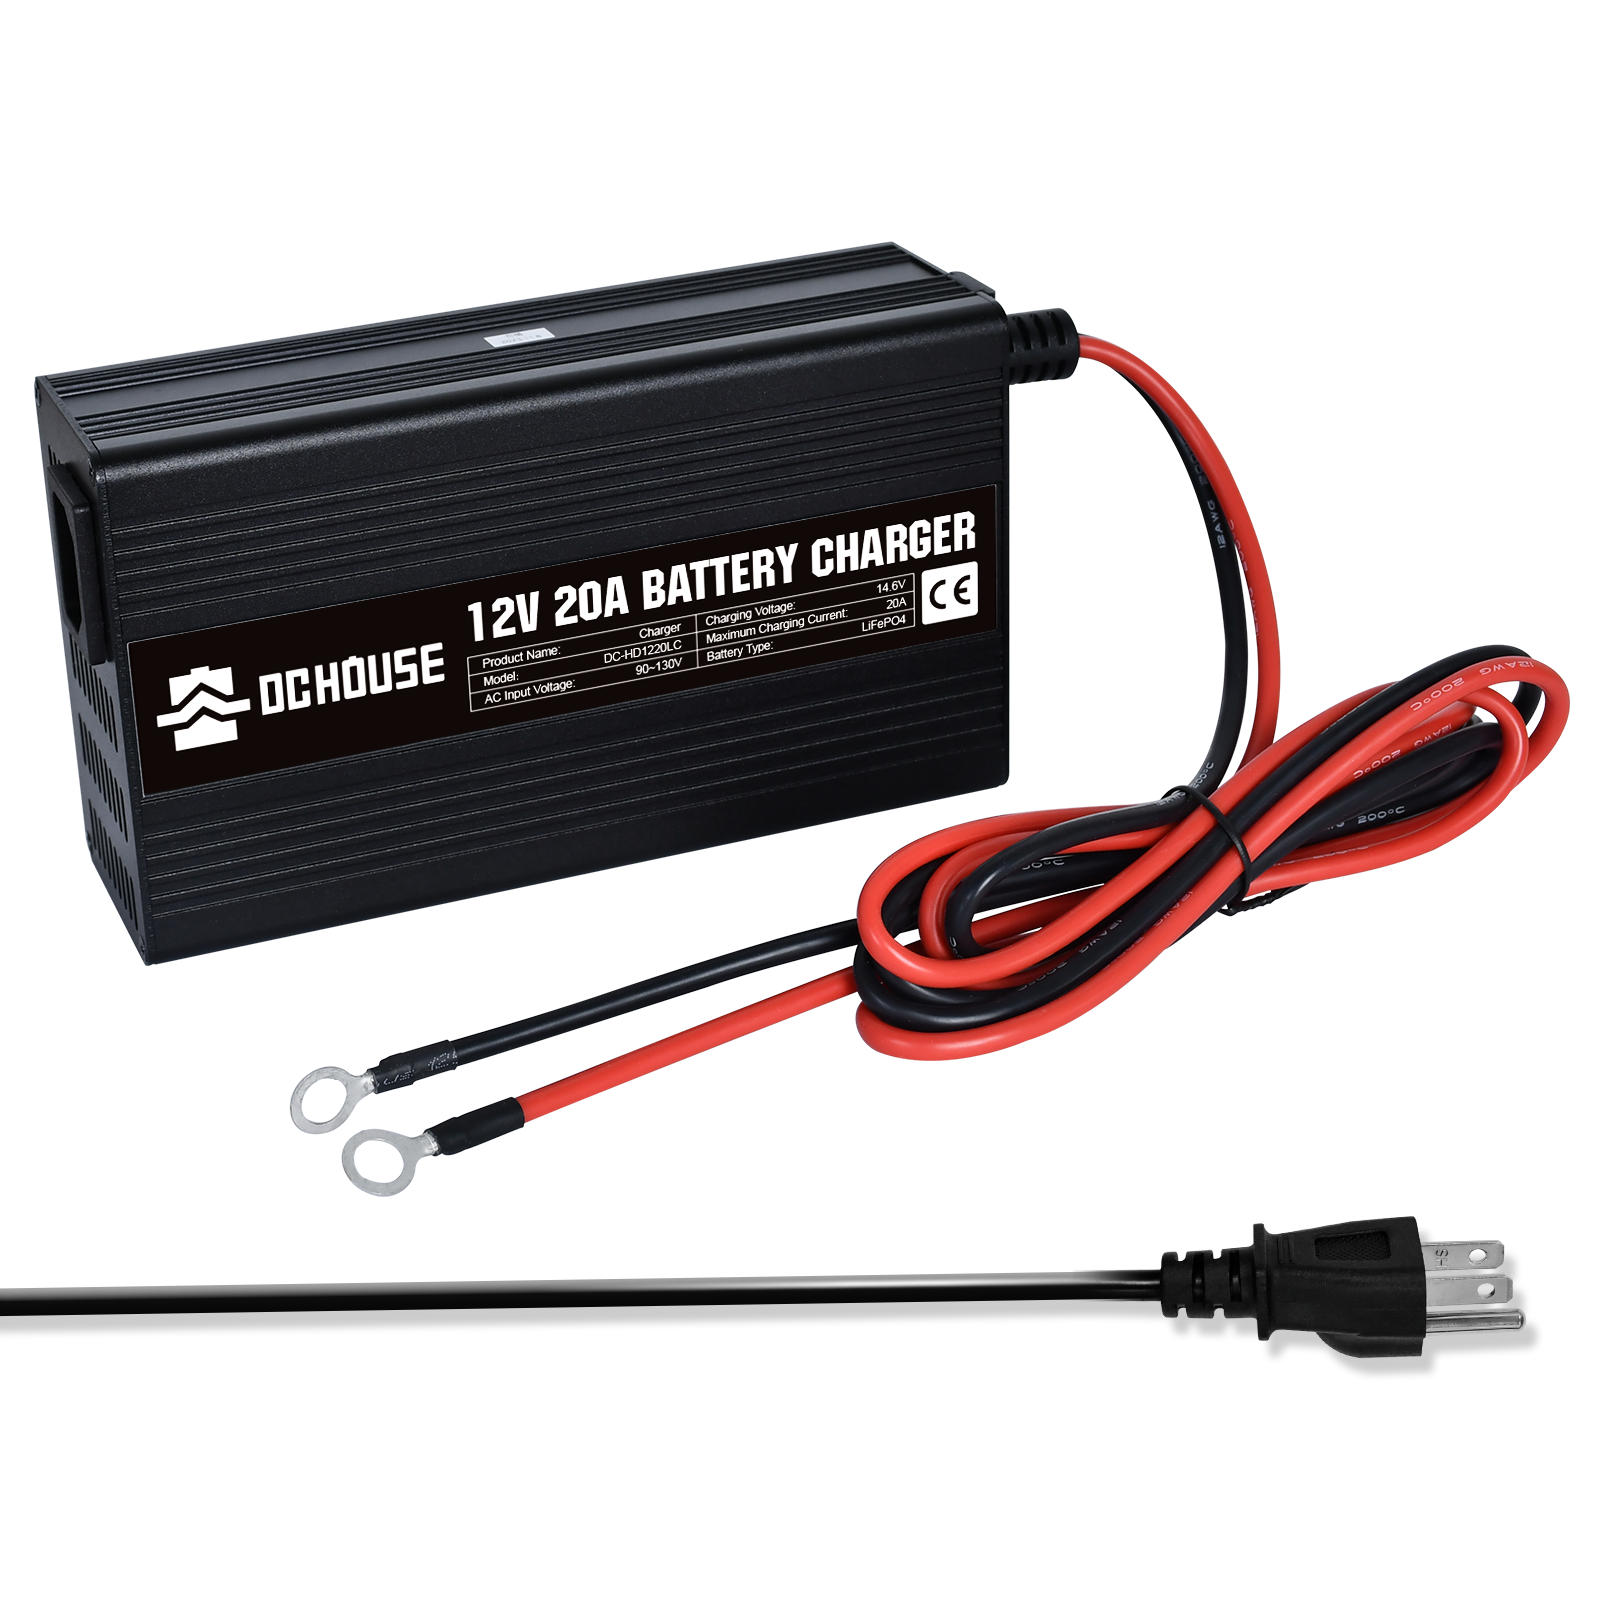 12V 20A AC-to-DC LiFePO4 Portable Battery Charger